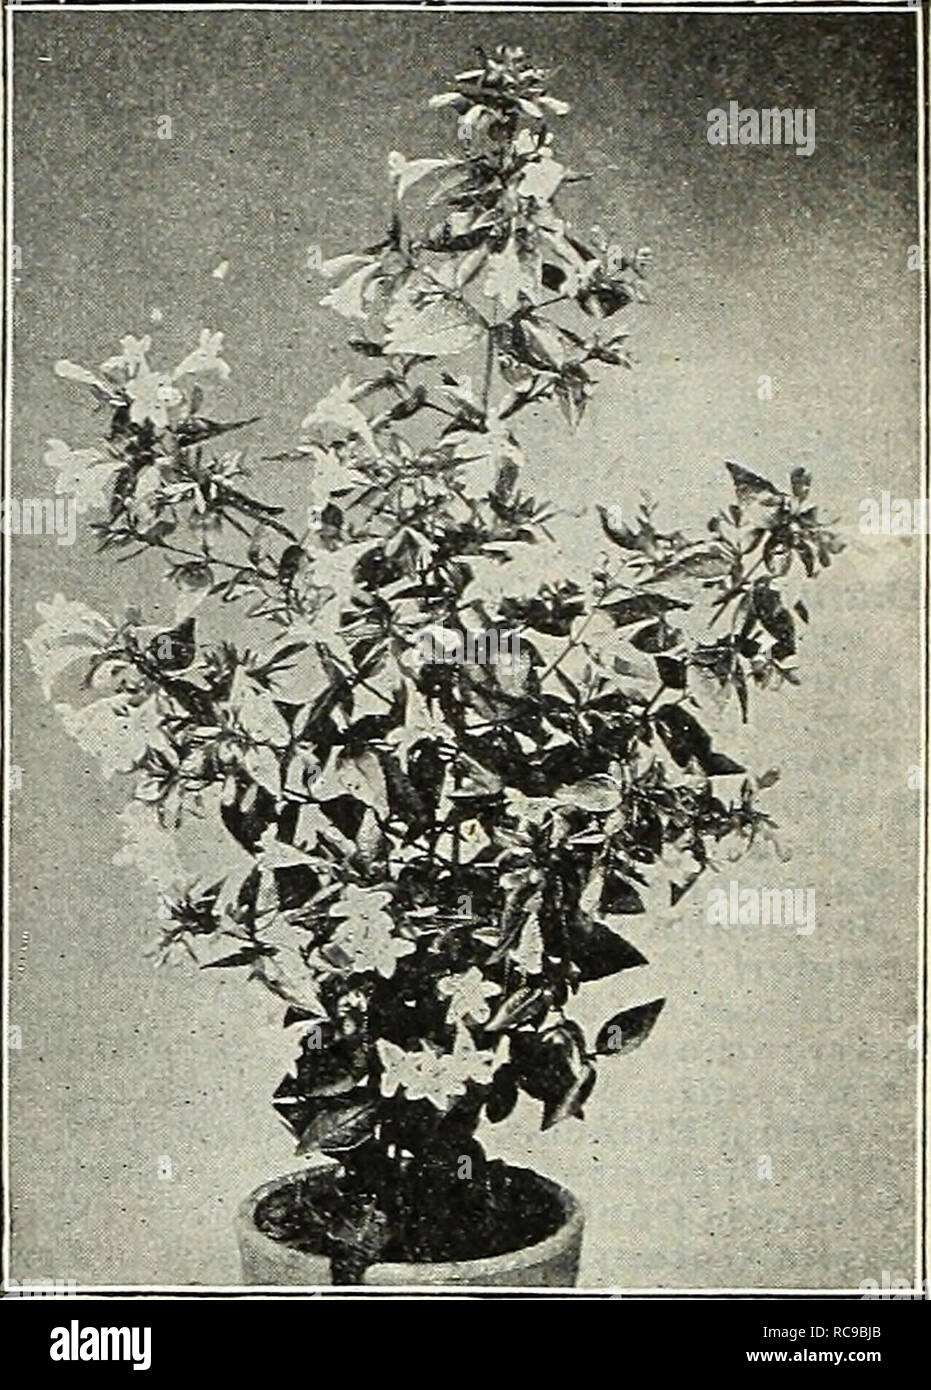 . Dreer's garden book : 1905. Seeds Catalogs; Nursery stock Catalogs; Gardening Equipment and supplies Catalogs; Flowers Seeds Catalogs; Vegetables Seeds Catalogs; Fruit Seeds Catalogs. ABELIA. Rupestris. A choice dwarf, small shrub of graceful habit, hardy as far north as Philadelphia, but requiring protection further north. It produces through the entire summer and fall months white tinted lilac heather-like flowers in such abundance as to completely cover the plant. 30 cts. each ; §3.00 per doz. ABUTII.ONS. Arthur Belsham. Orange-red with deeper veins. Boule de Neige. Fine, pure white. Dalo Stock Photo